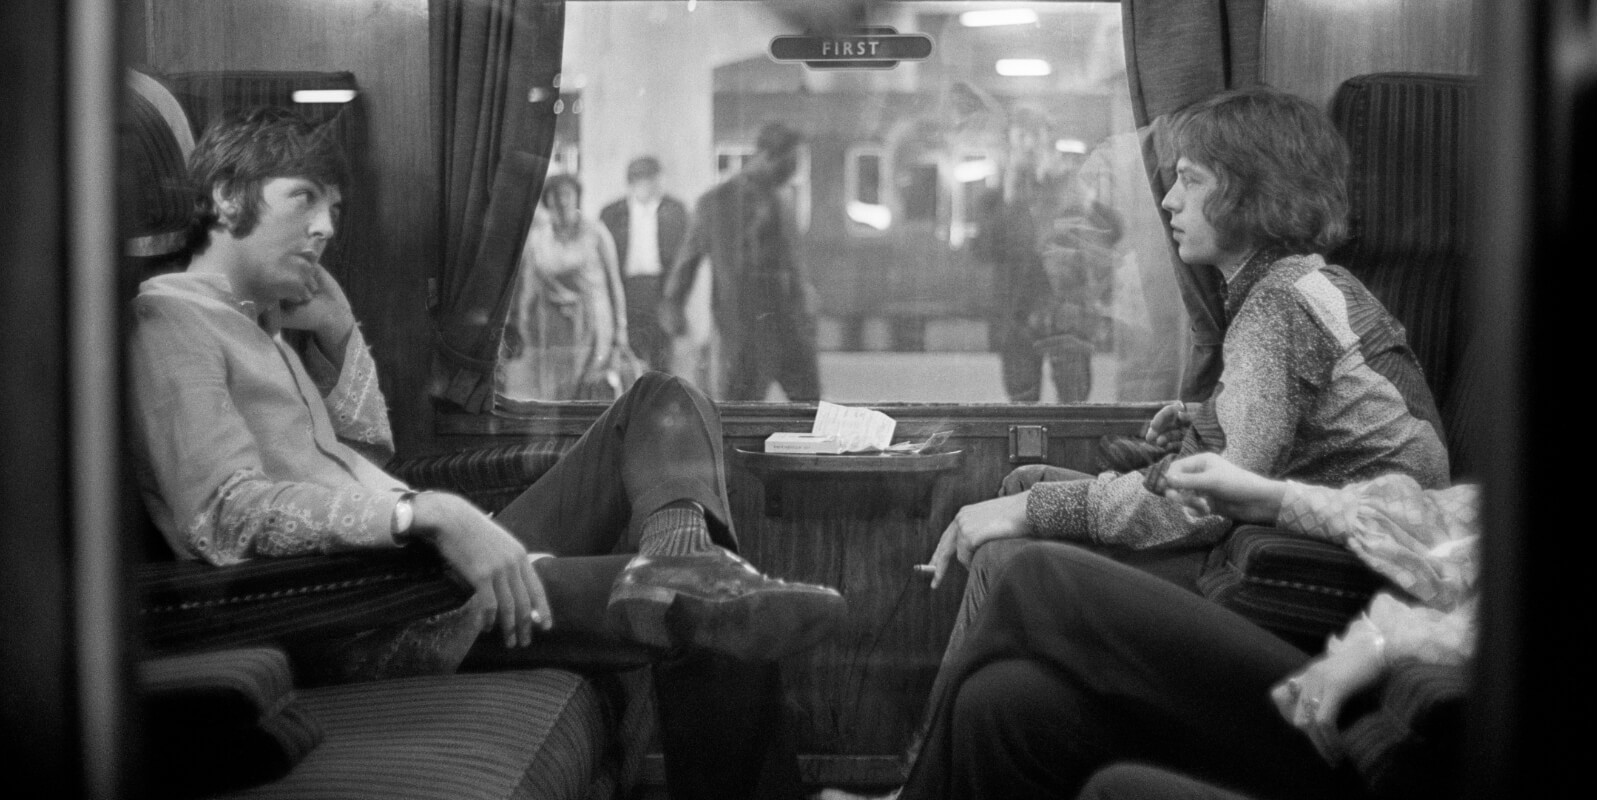 Paul McCartney and Mick Jagger ride a train together in August 1967.